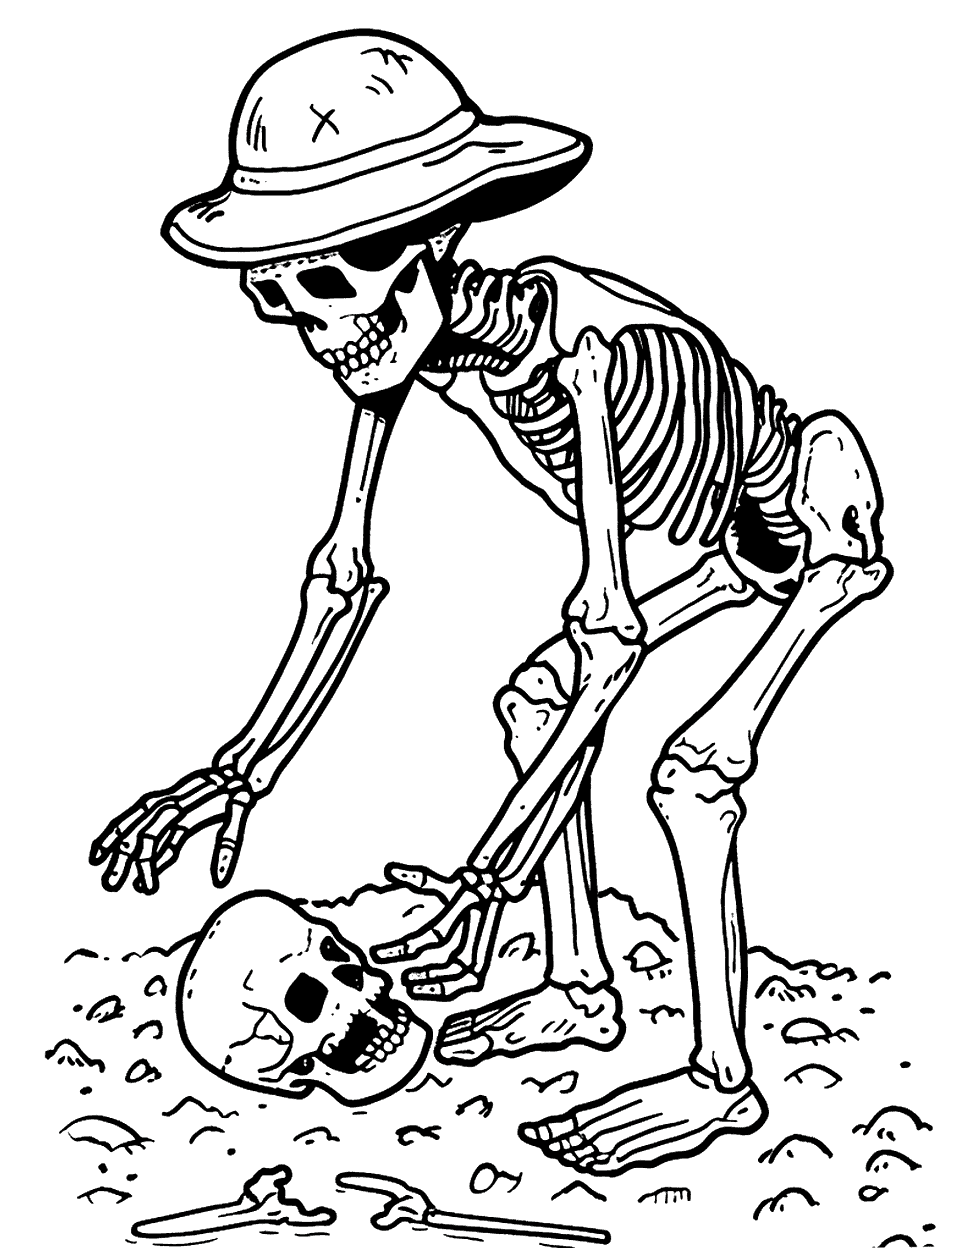 Archaeologist Skeleton at Work Coloring Page - An archaeologist skeleton carefully uncovering another skeleton buried in the earth.